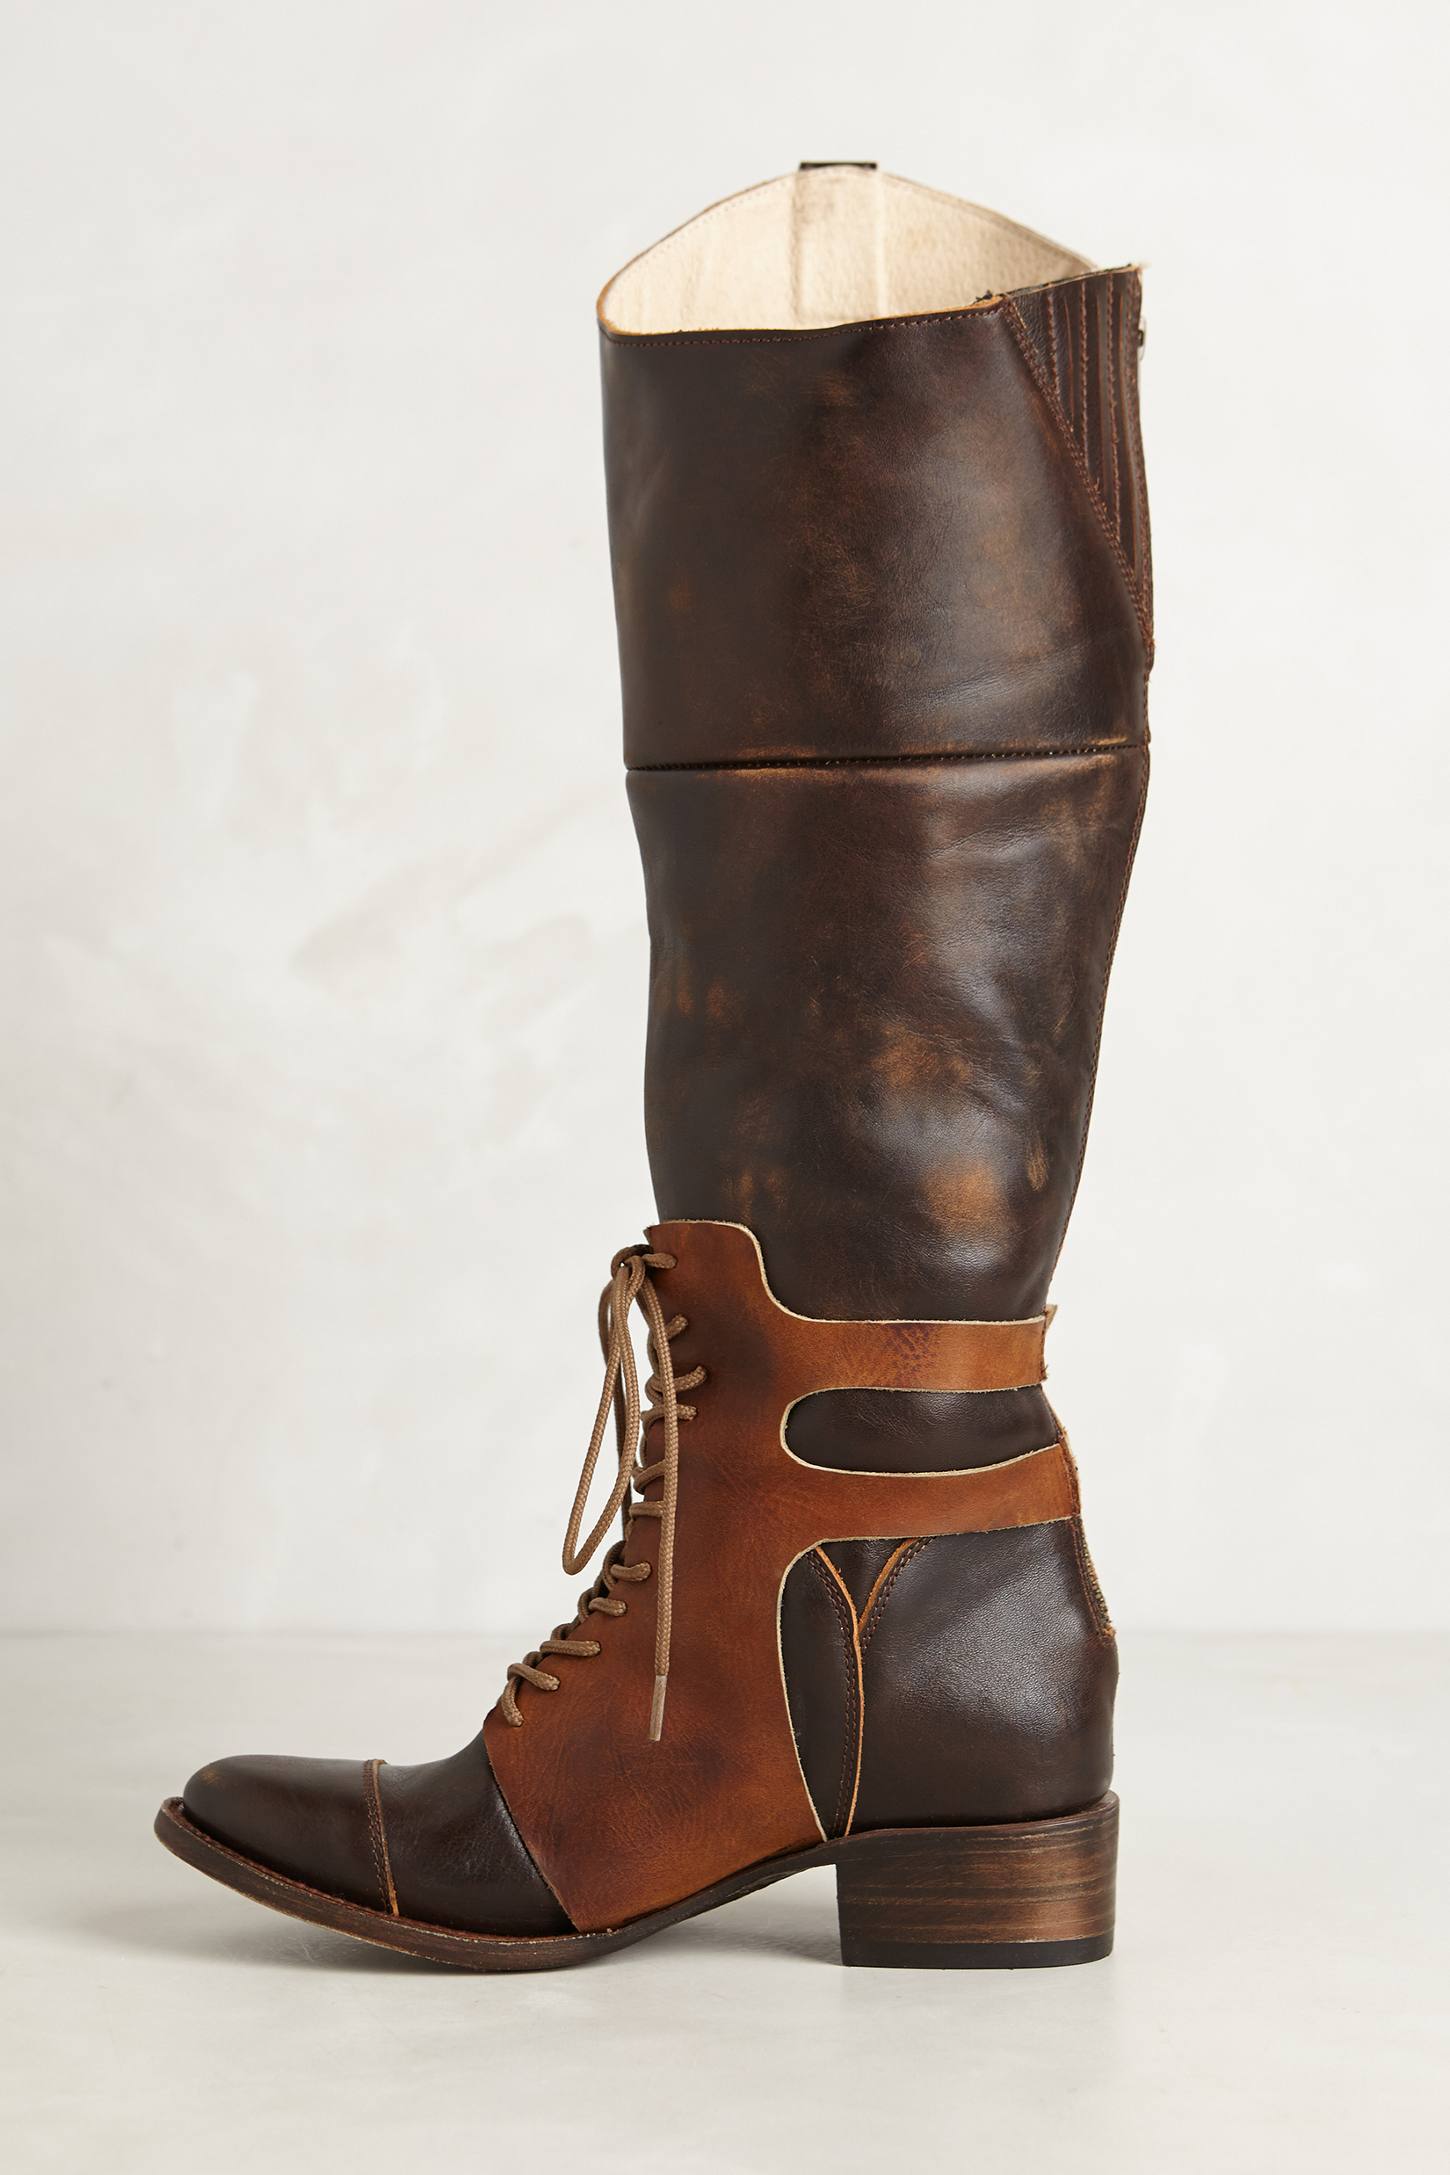 Lyst - Freebird By Steven Thoroughbred Boots in Brown